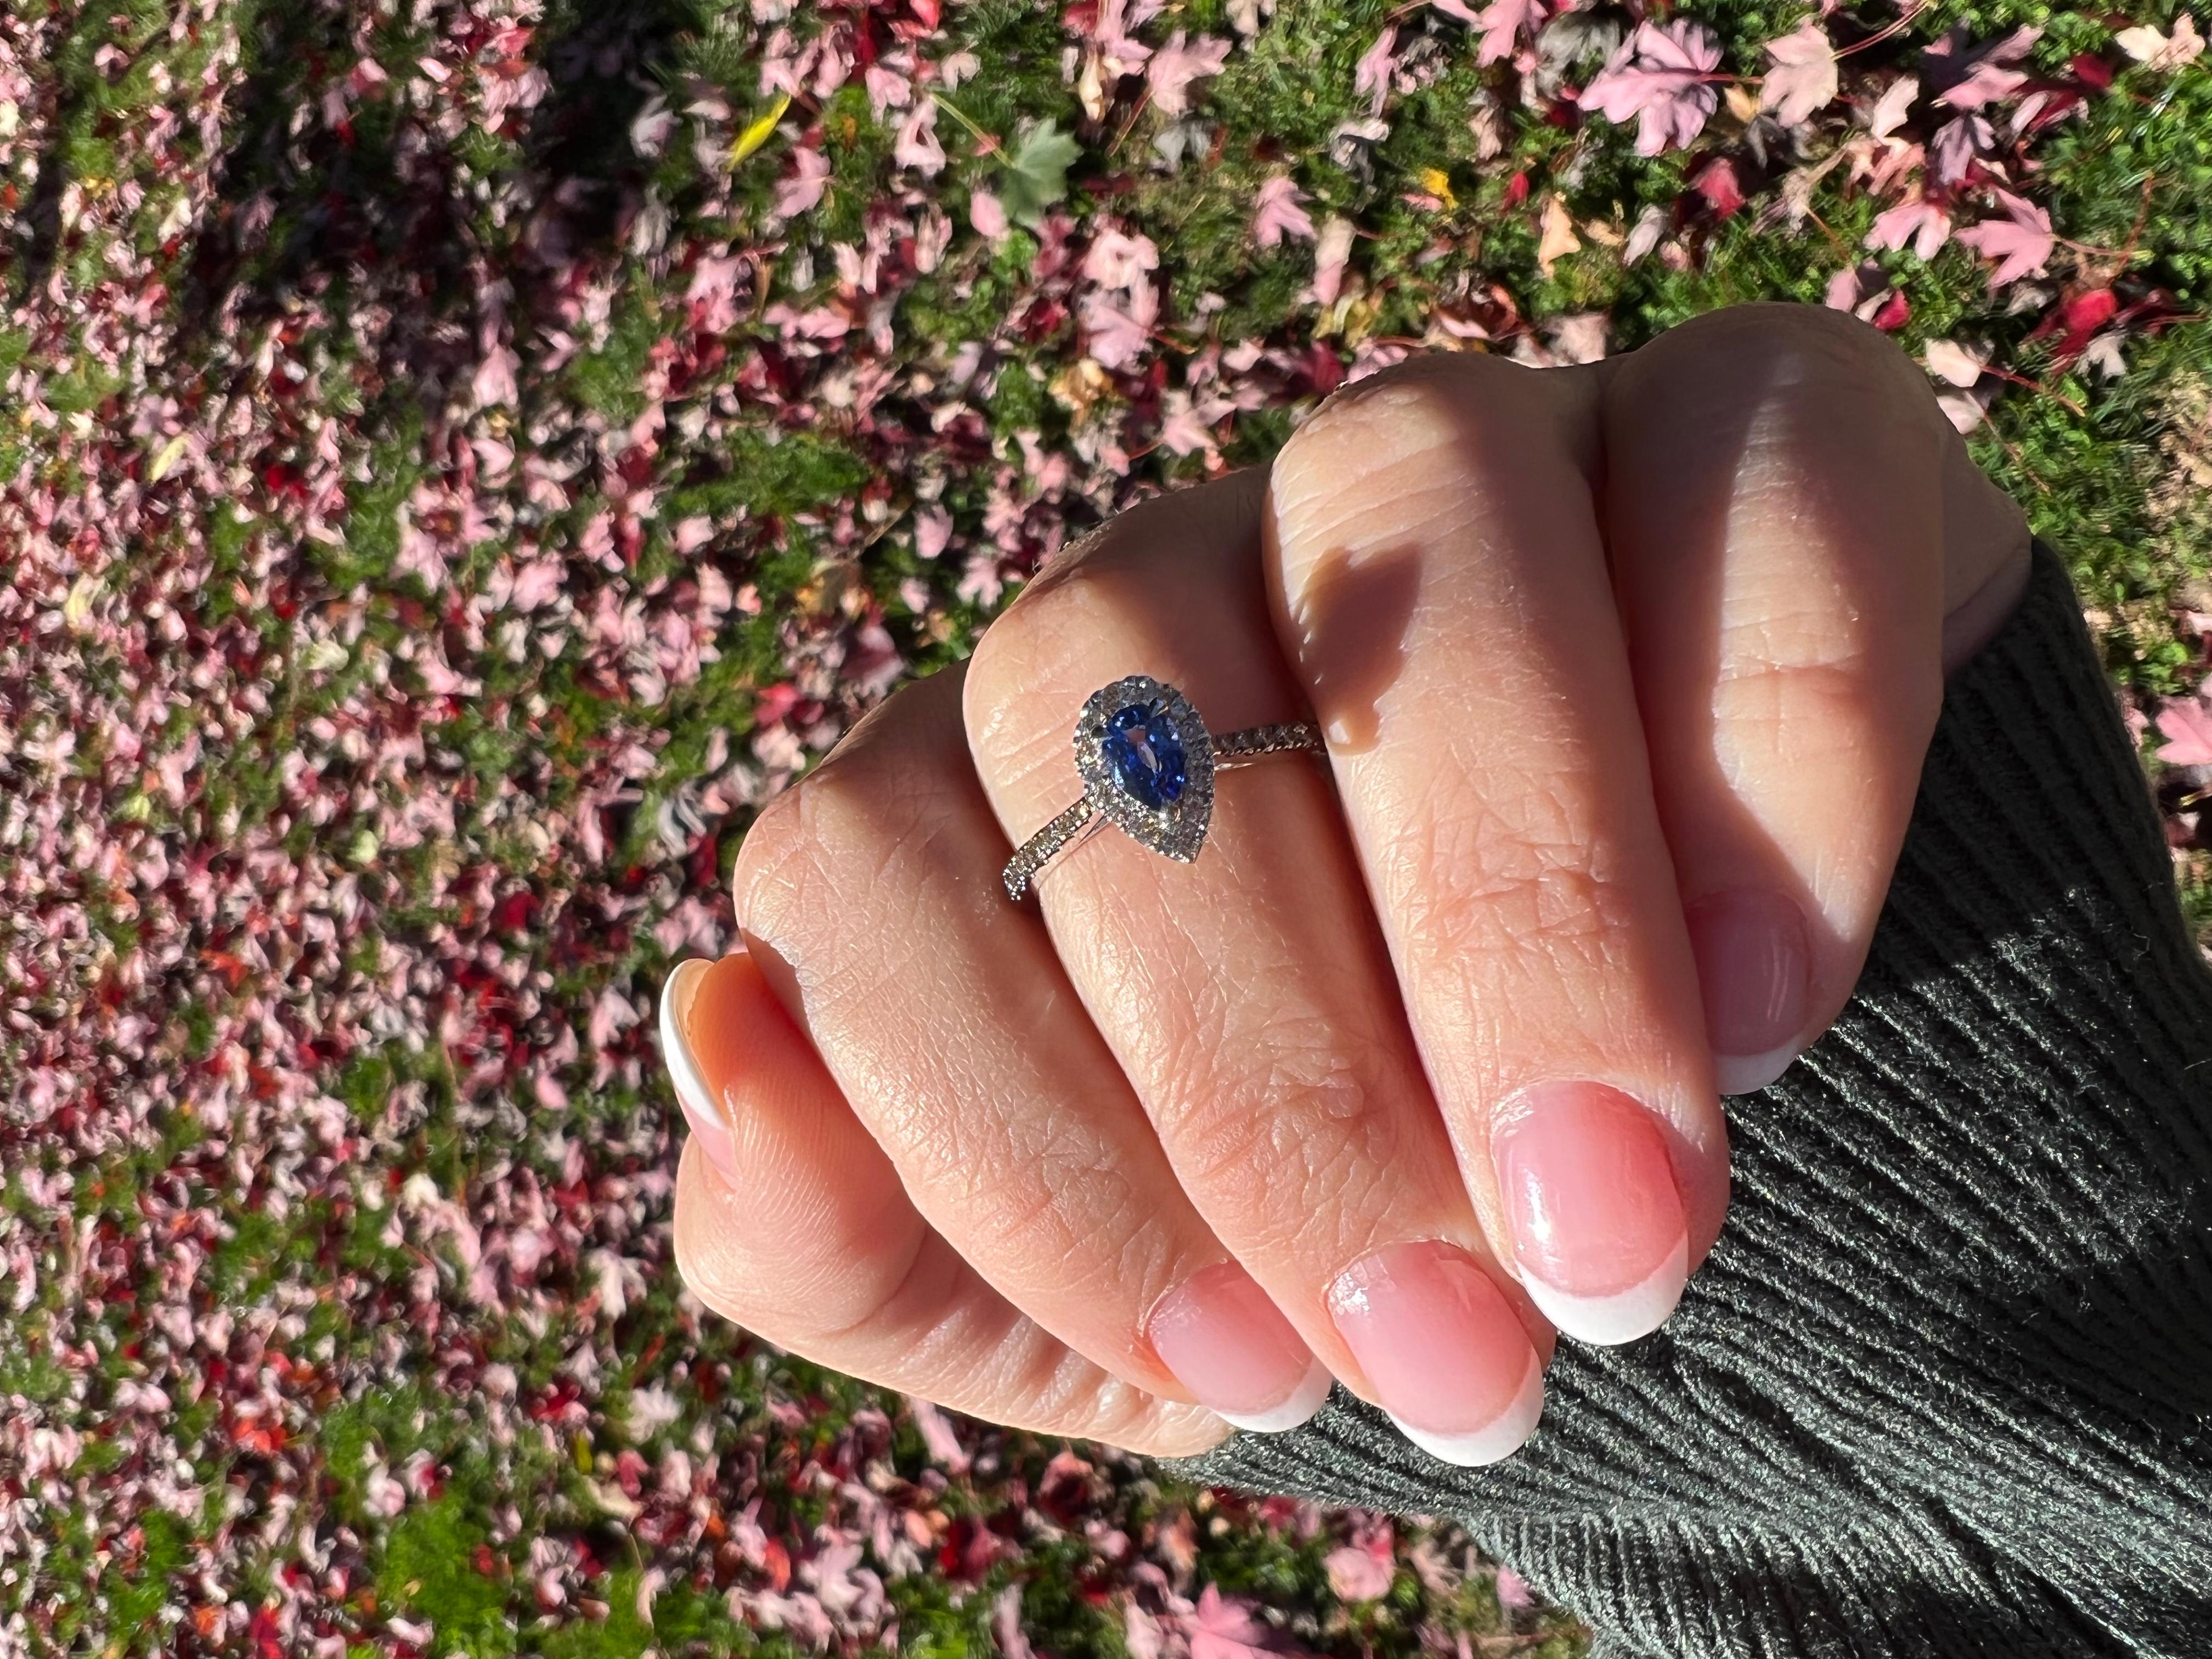 Le Vian® Ring featuring 1/2 cts. Blueberry Sapphire™, 1/5 cts. Chocolate Diamonds®, 1/6 cts. Nude Diamonds™ set in 14K Vanilla Gold®
